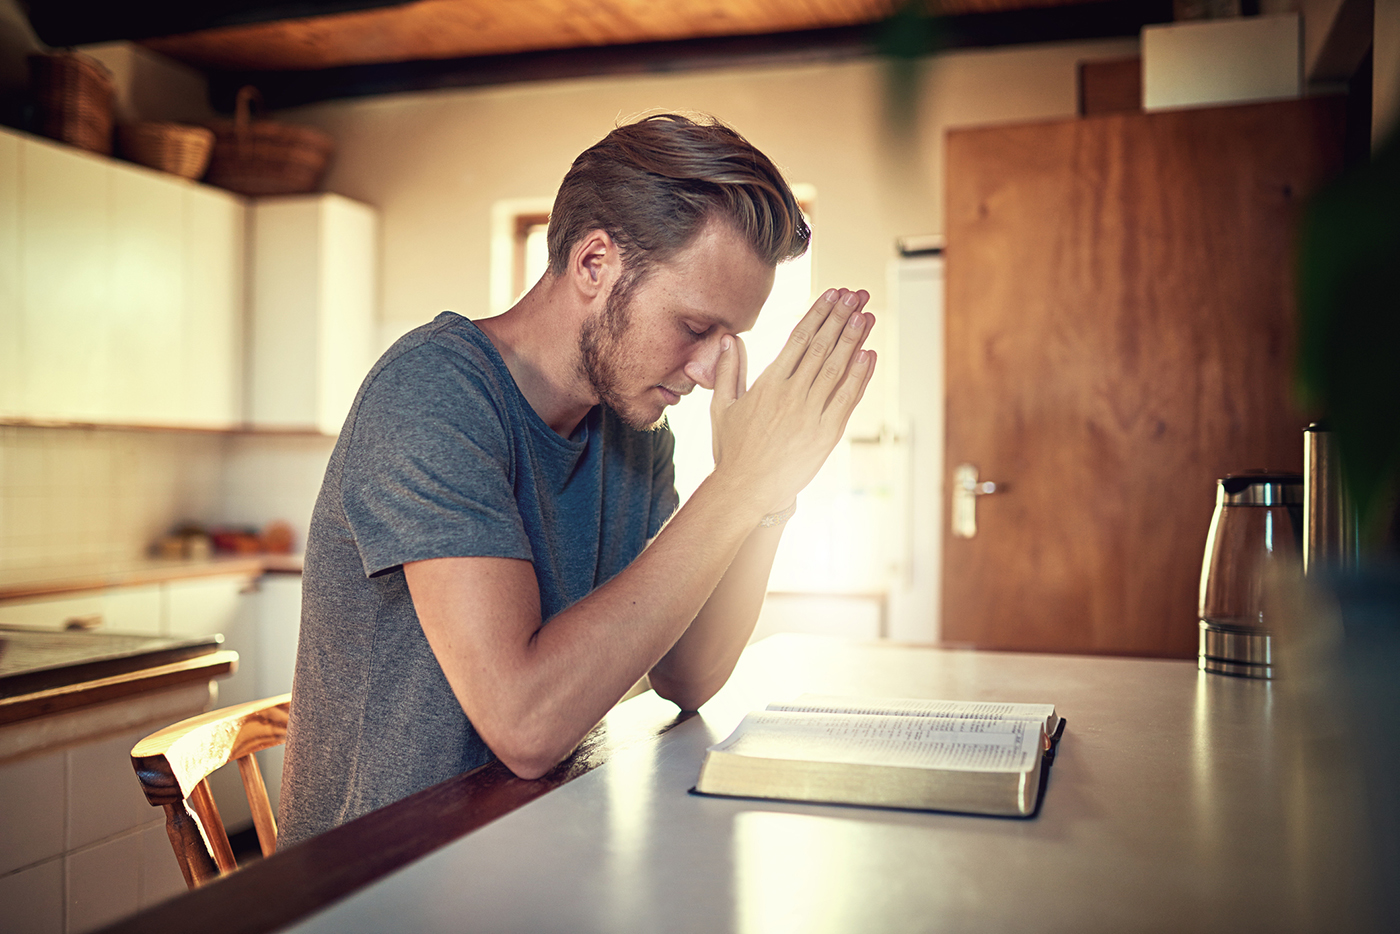 Shot of a devoted young man clasping his hands in prayer over an open Bible